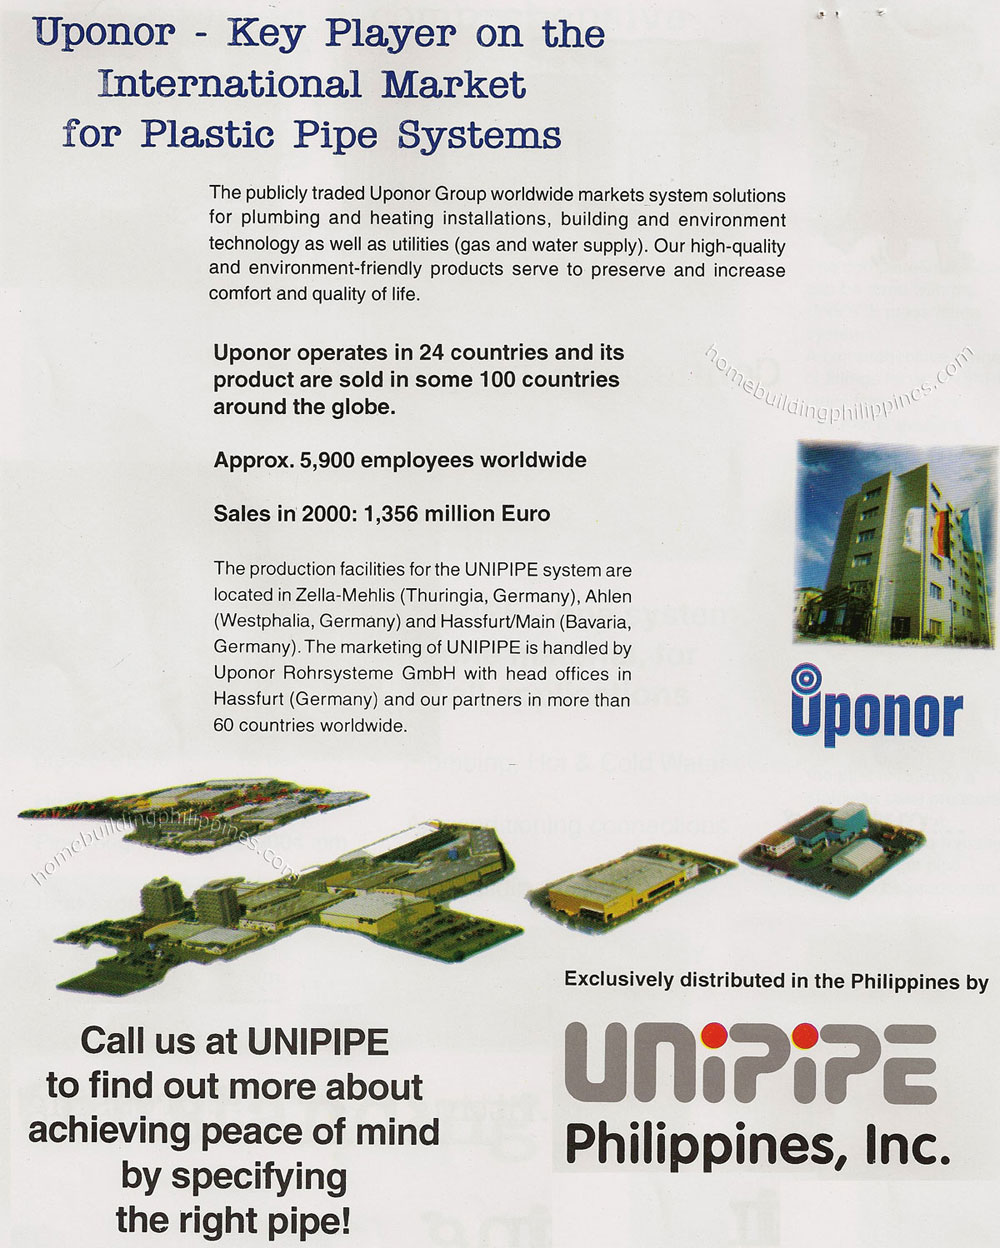 About Uponor